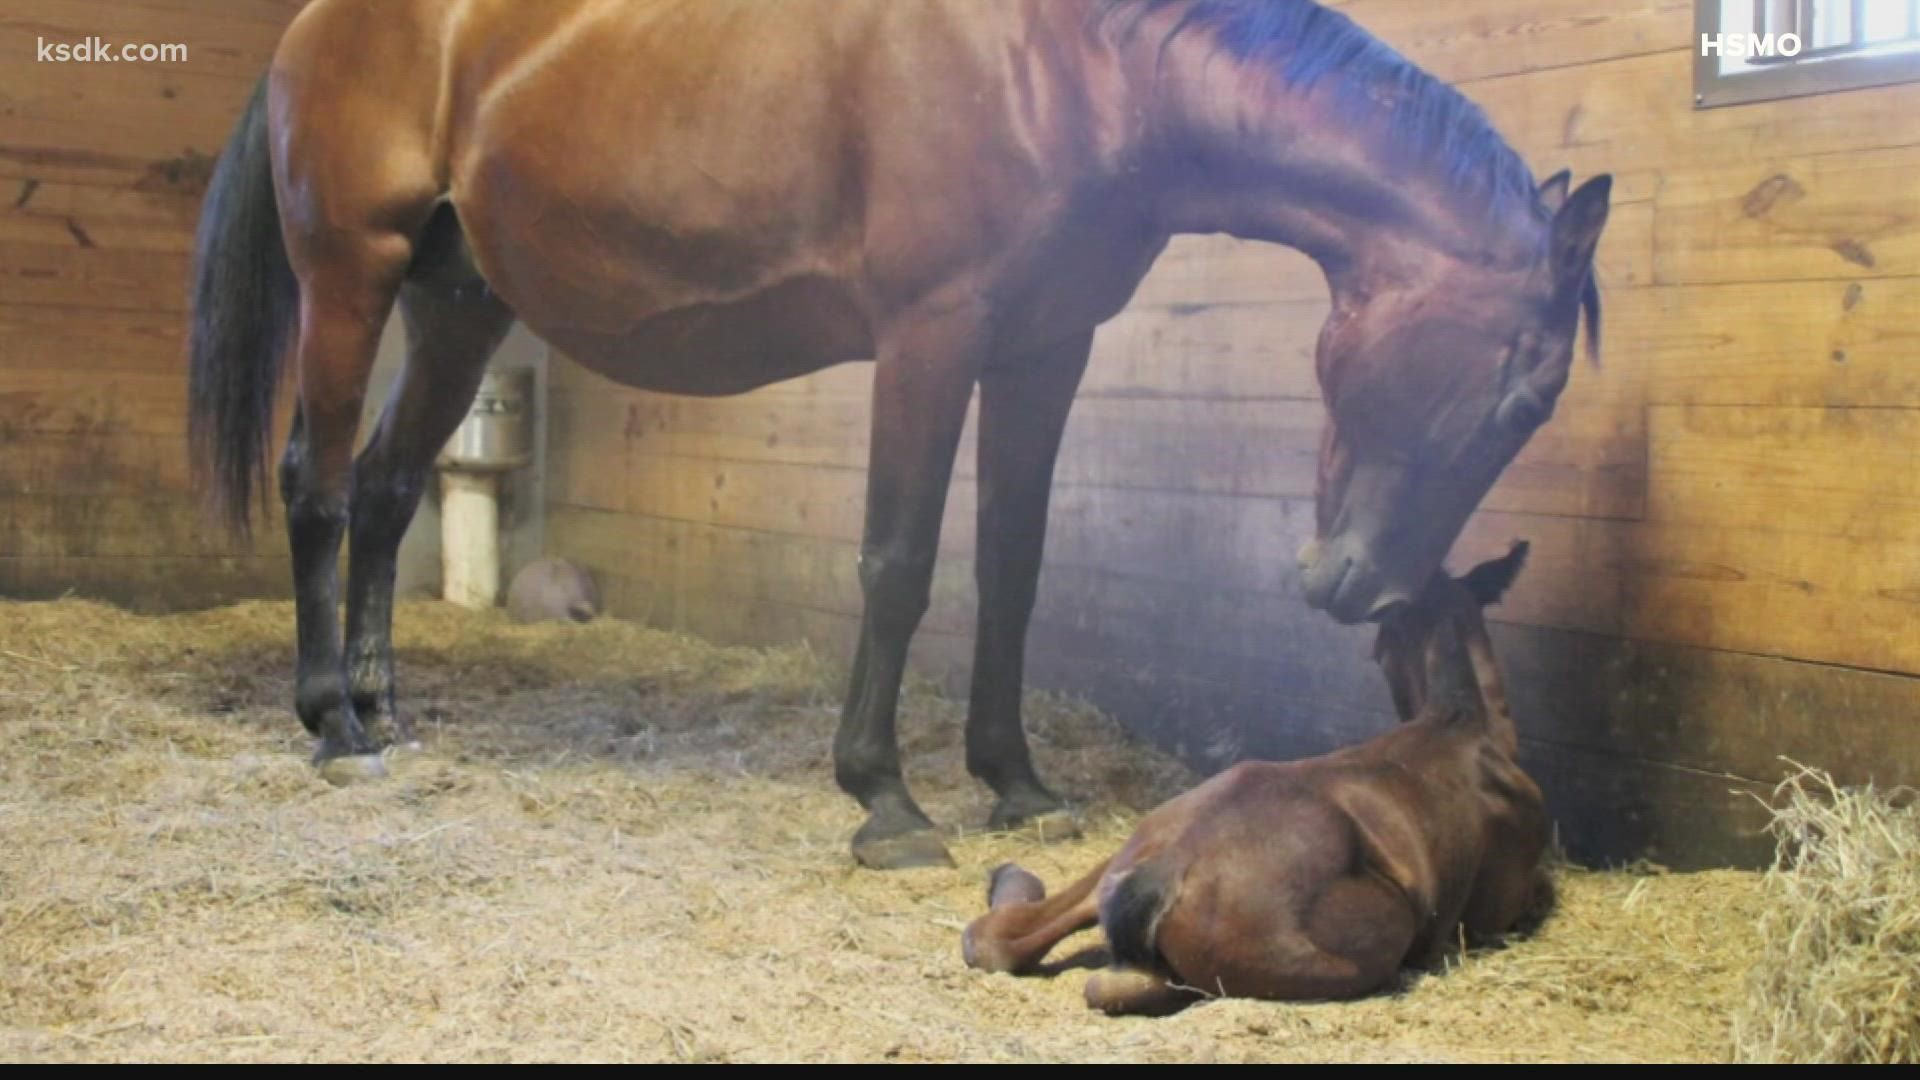 Journey, 20, gave birth to a colt (a boy) early Monday morning at the Humane Society of Missouri’s Longmeadow Rescue Ranch.